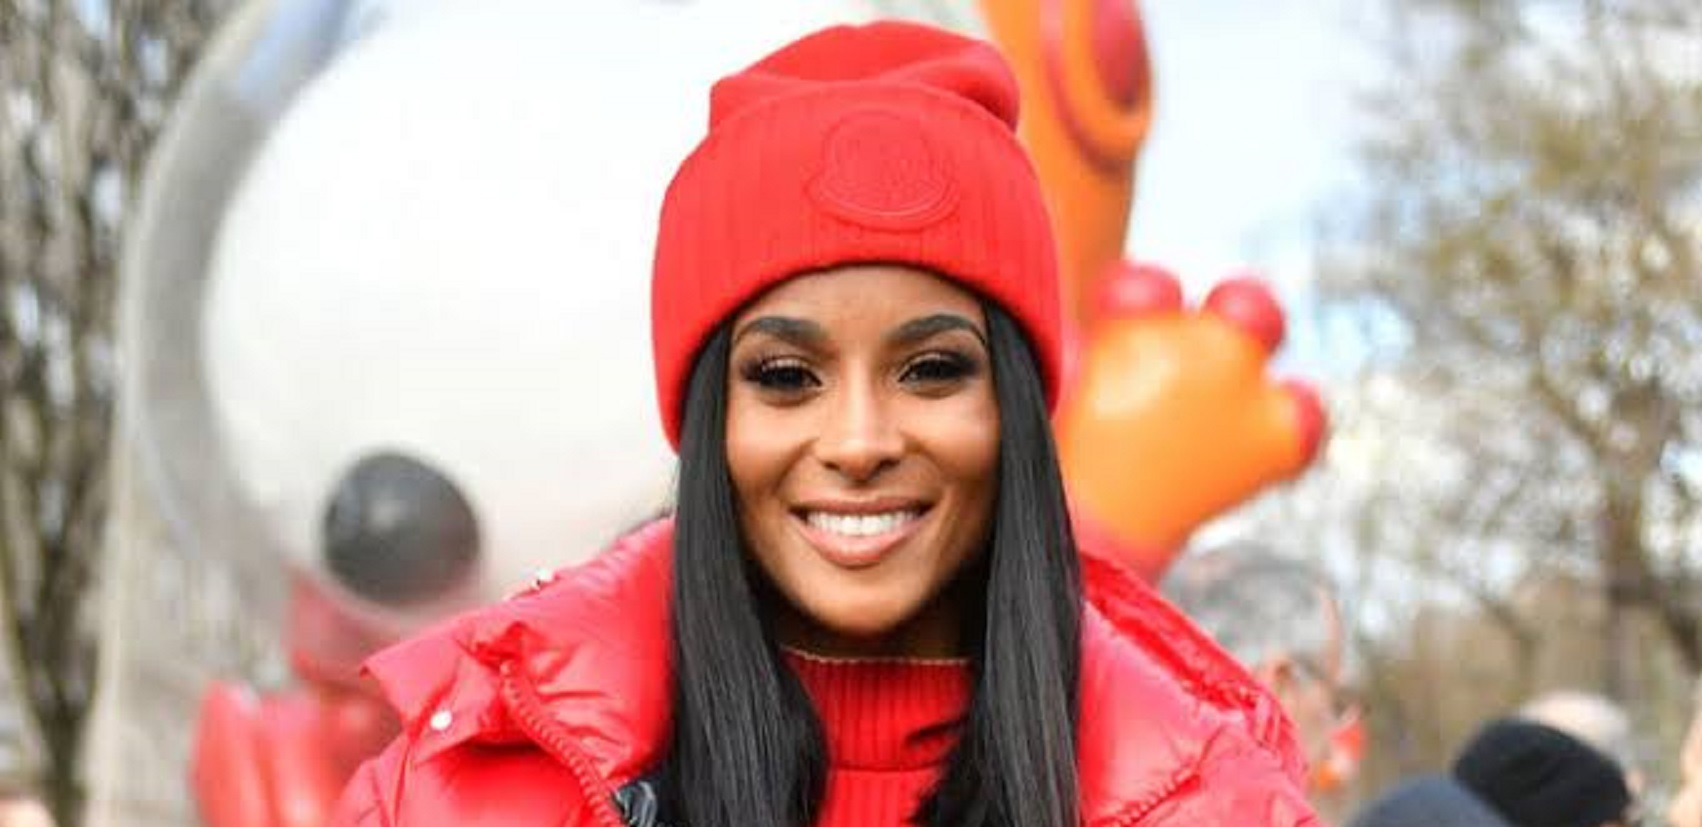 Watch: Ciara Performs Christmas Medley on NBC’s ‘Holidays with the Houghs’